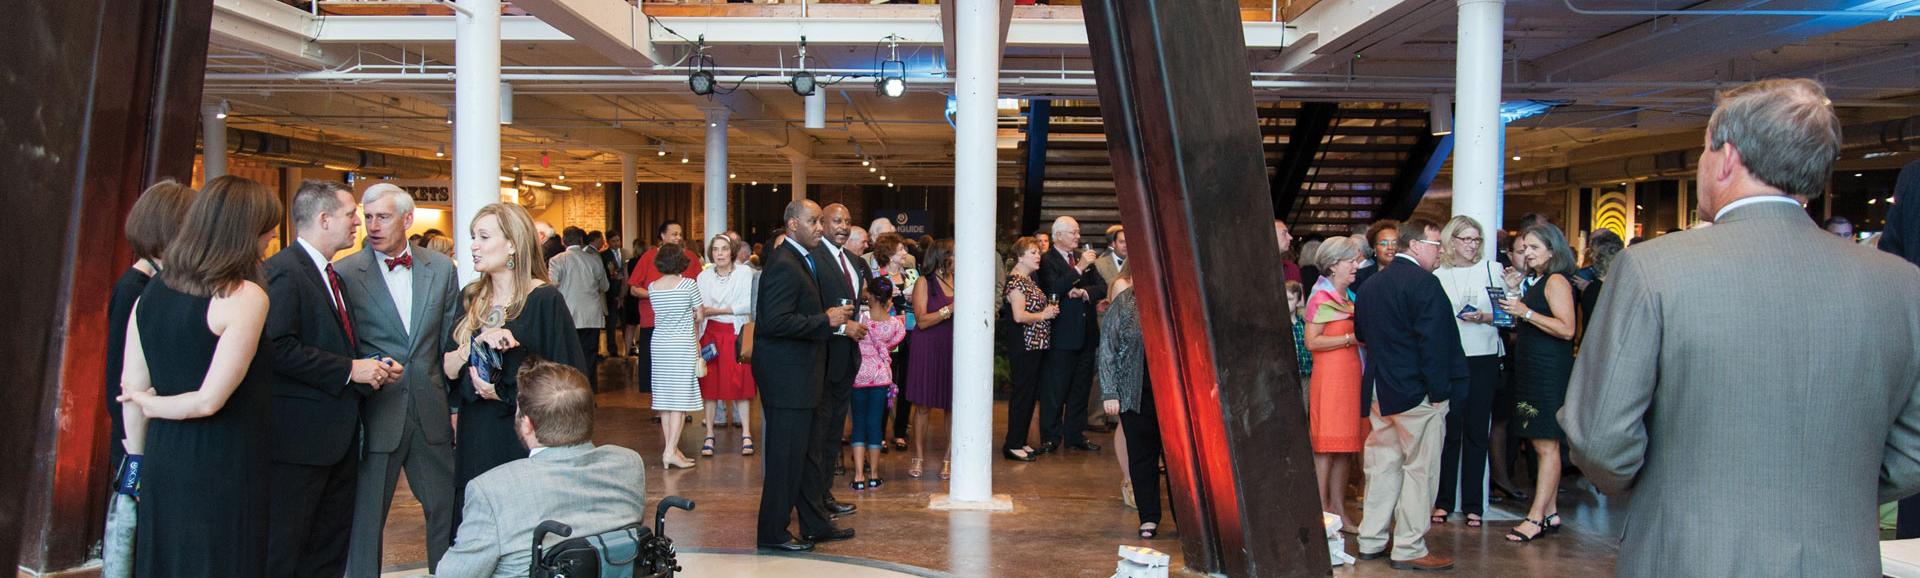 Events guests mill about around the iconic telescope legs at the South Carolina State Museum.